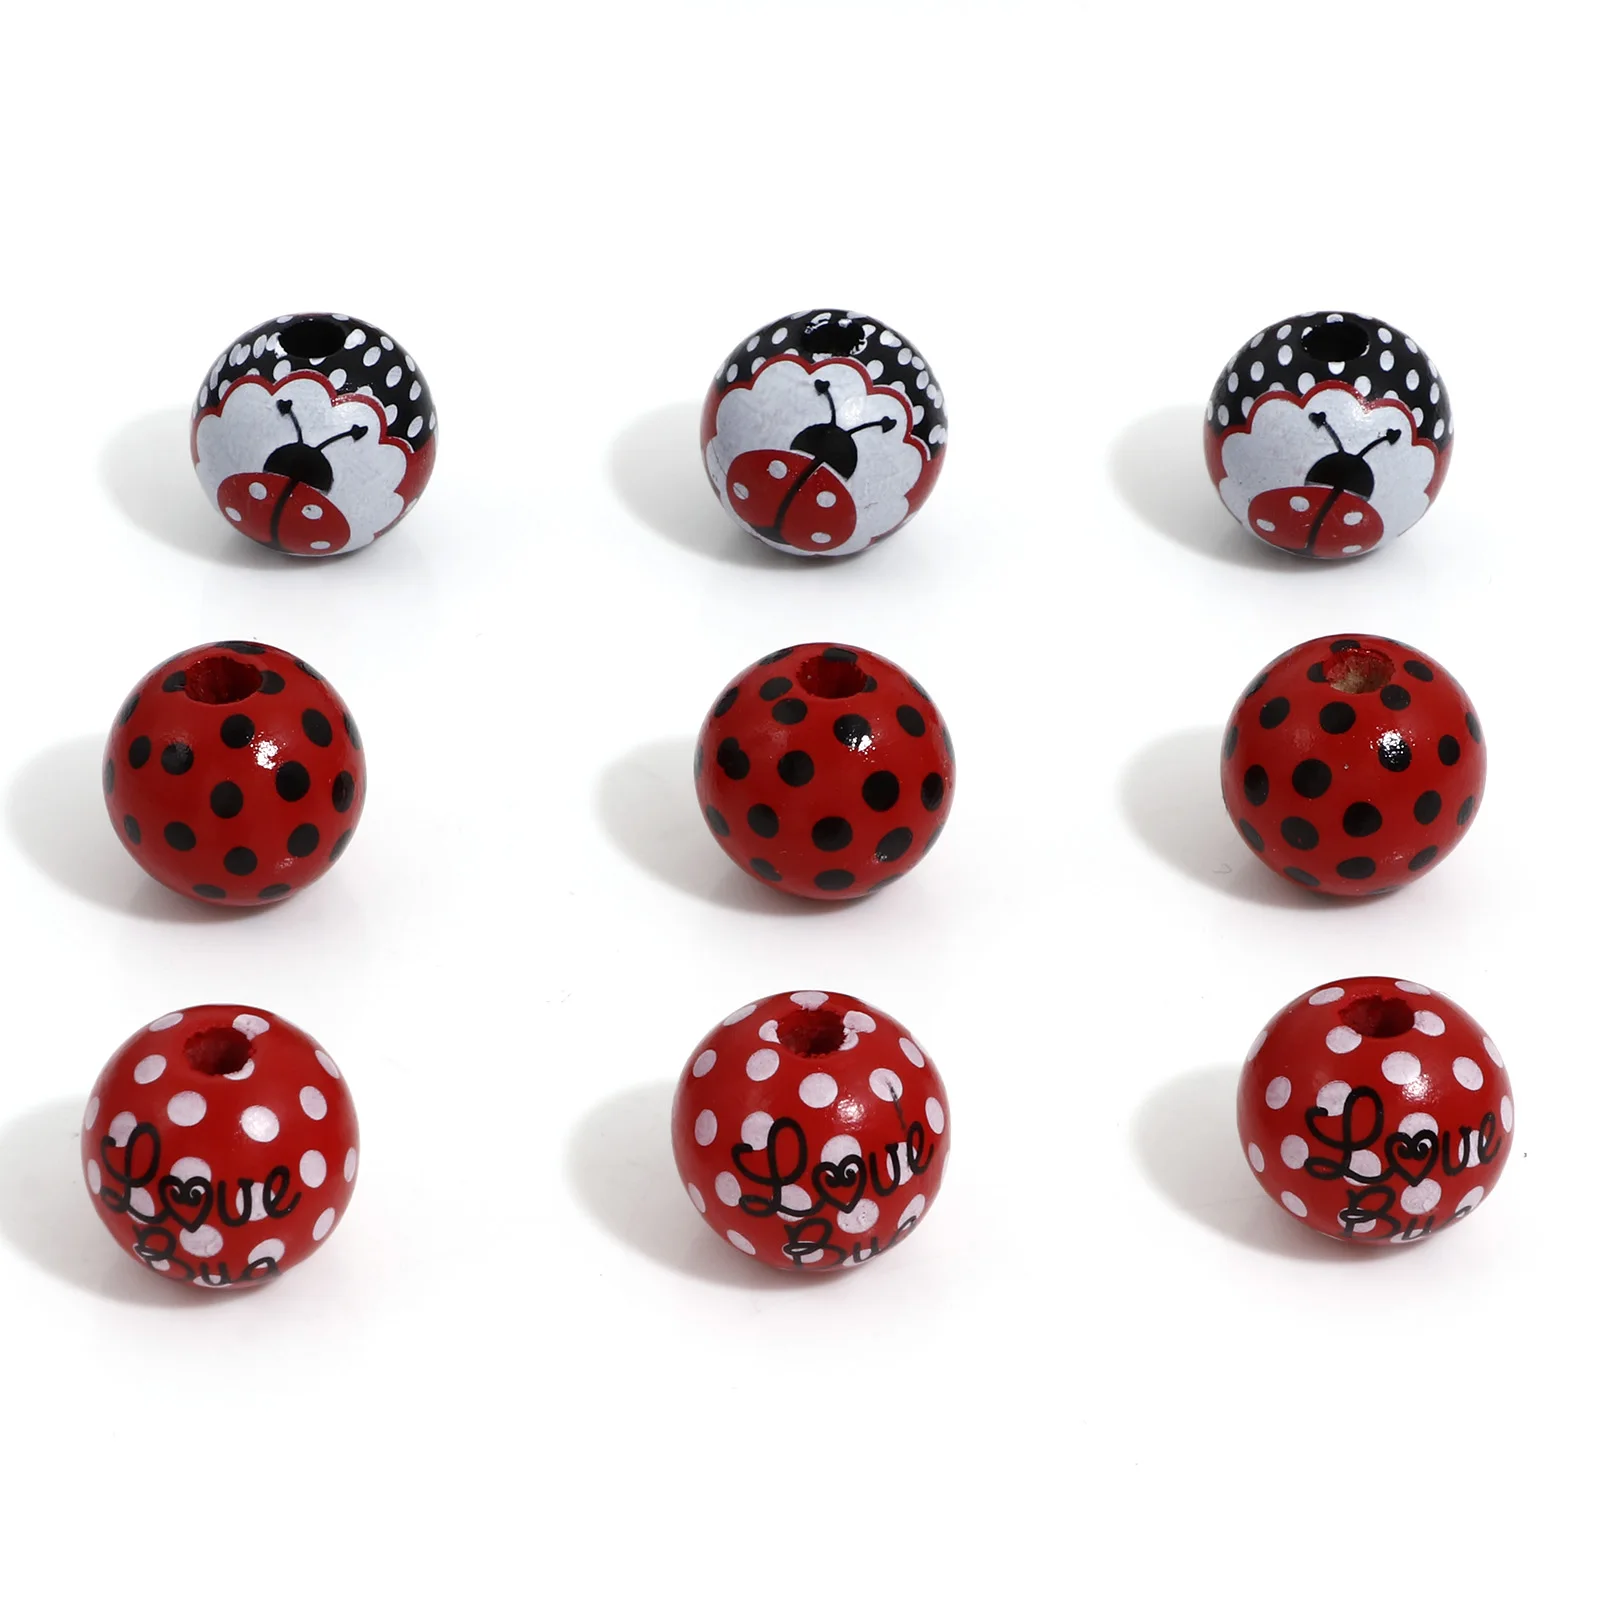 

20PC 16mm Multicolor Wood Beads Insect Ladybird Round Ball Spacer Bead For Jewelry Making DIY Necklace Bracelet Jewelry Supplies